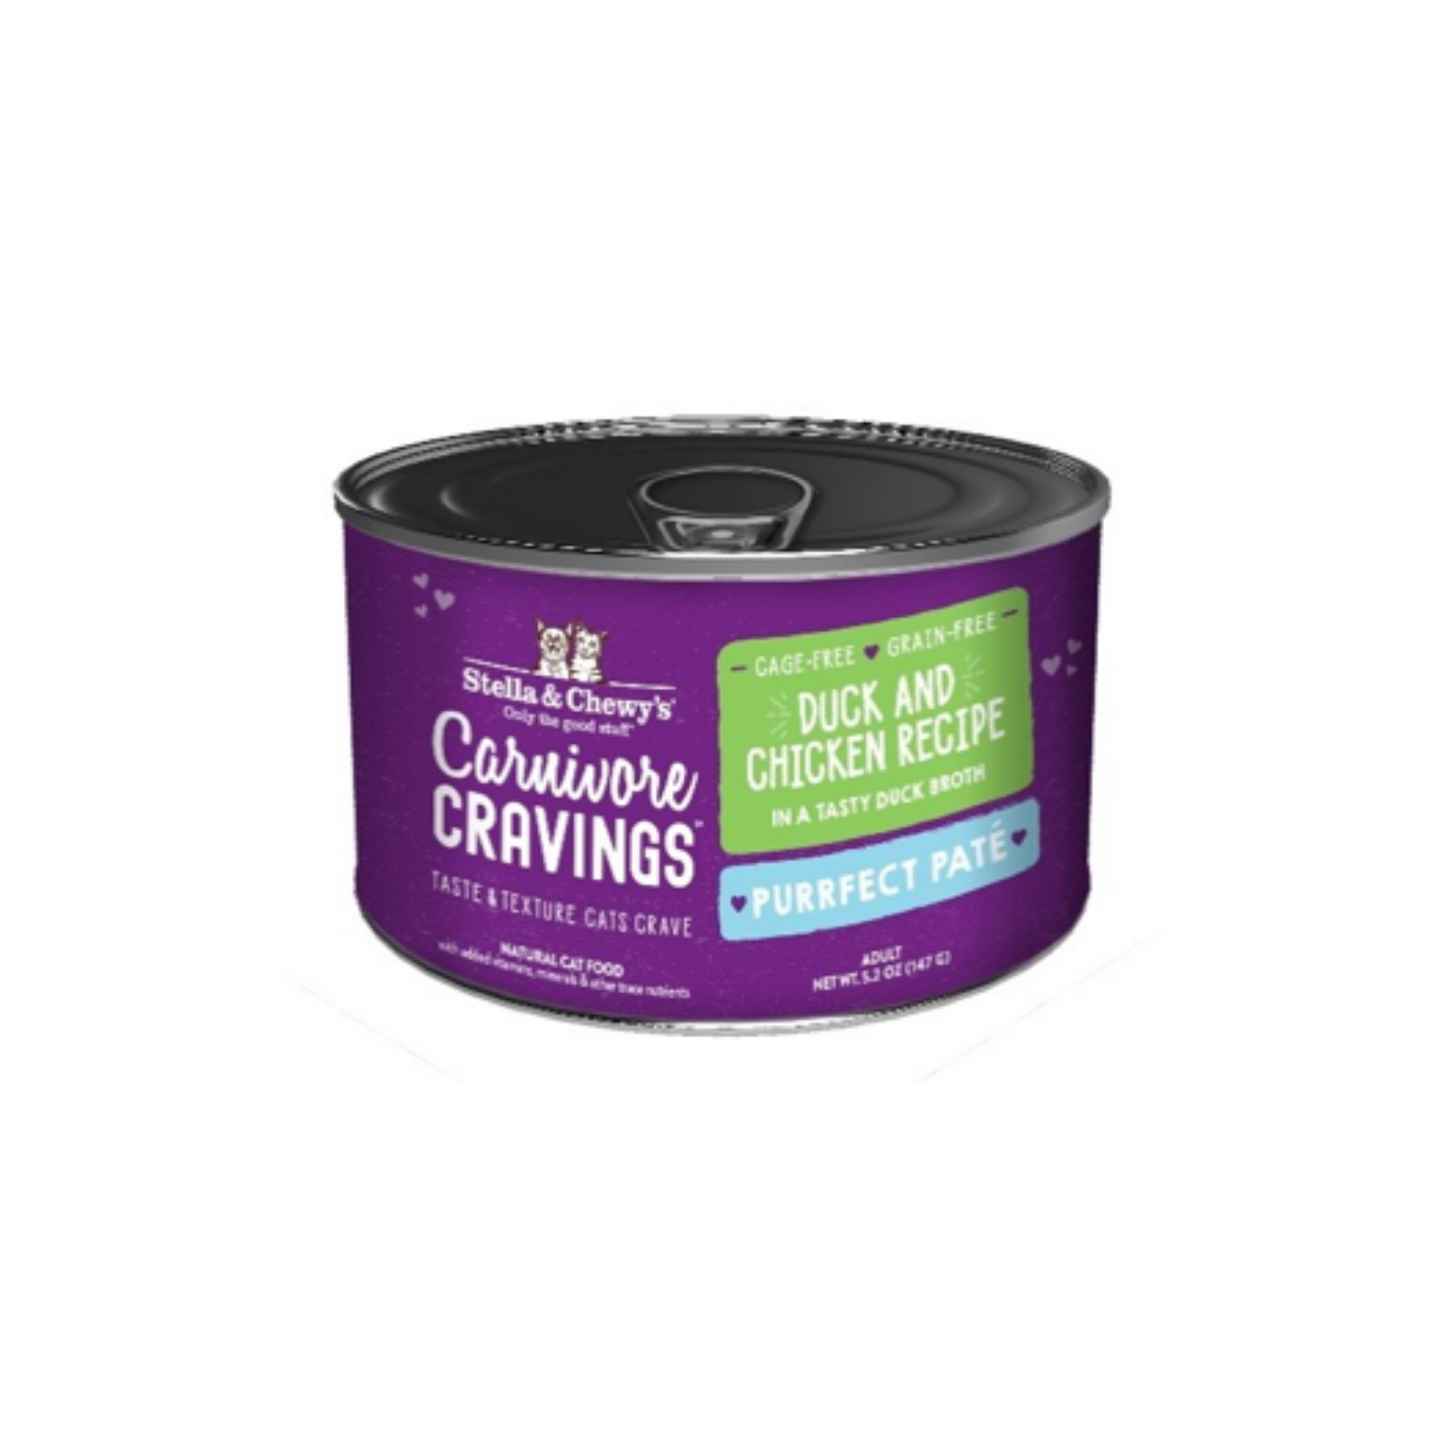 Stella and Chewy's Carnivore Cravings-Purrfect Pate Duck & Chicken Pate Recipe in Broth Cat Food 5.2oz